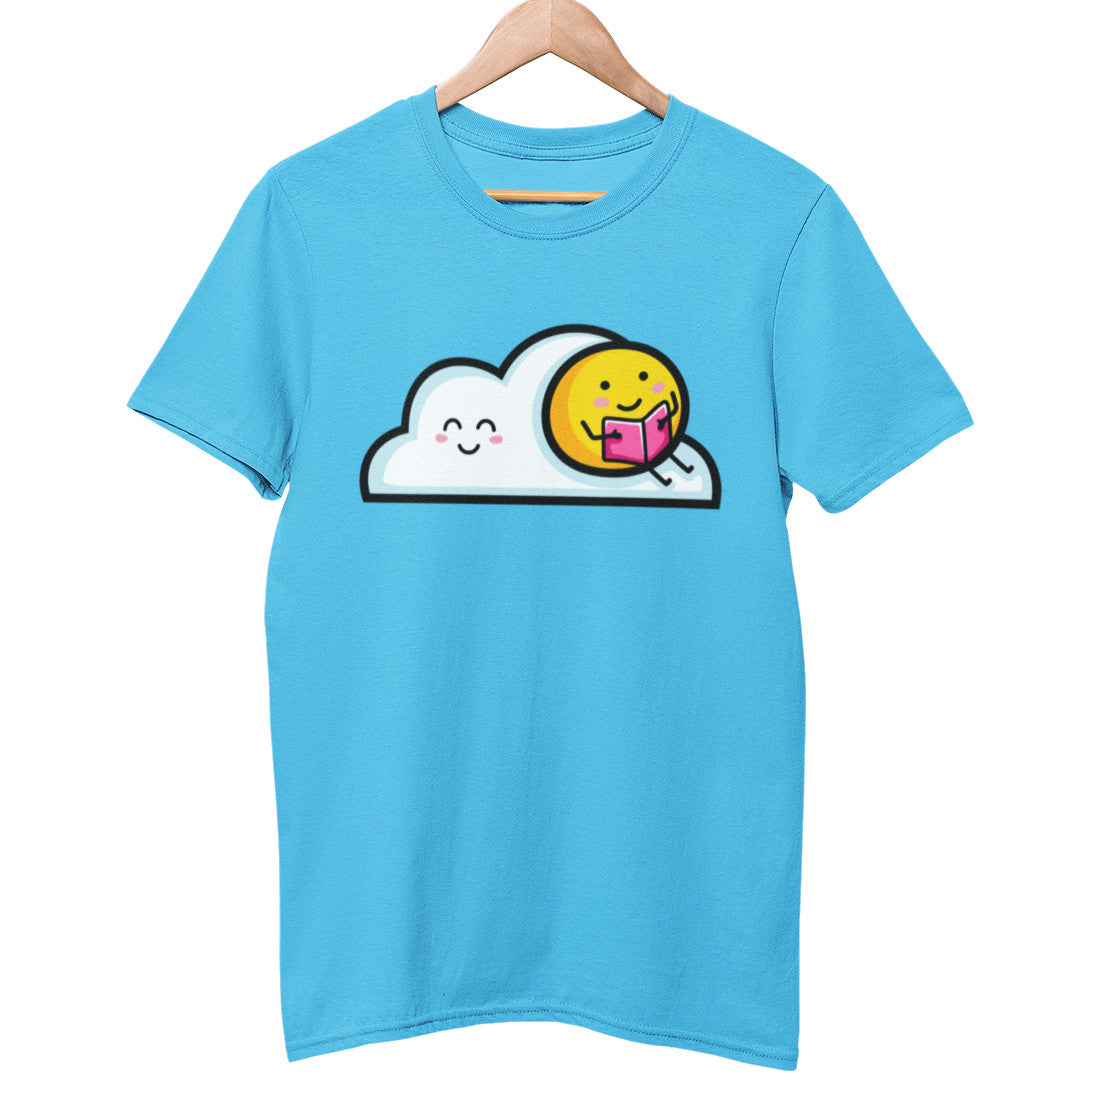 An aqua blue unisex crewneck t-shirt on a hanger with a design on its chest of a kawaii cute yellow sun sitting on the right half of a white cloud and reading a pink book